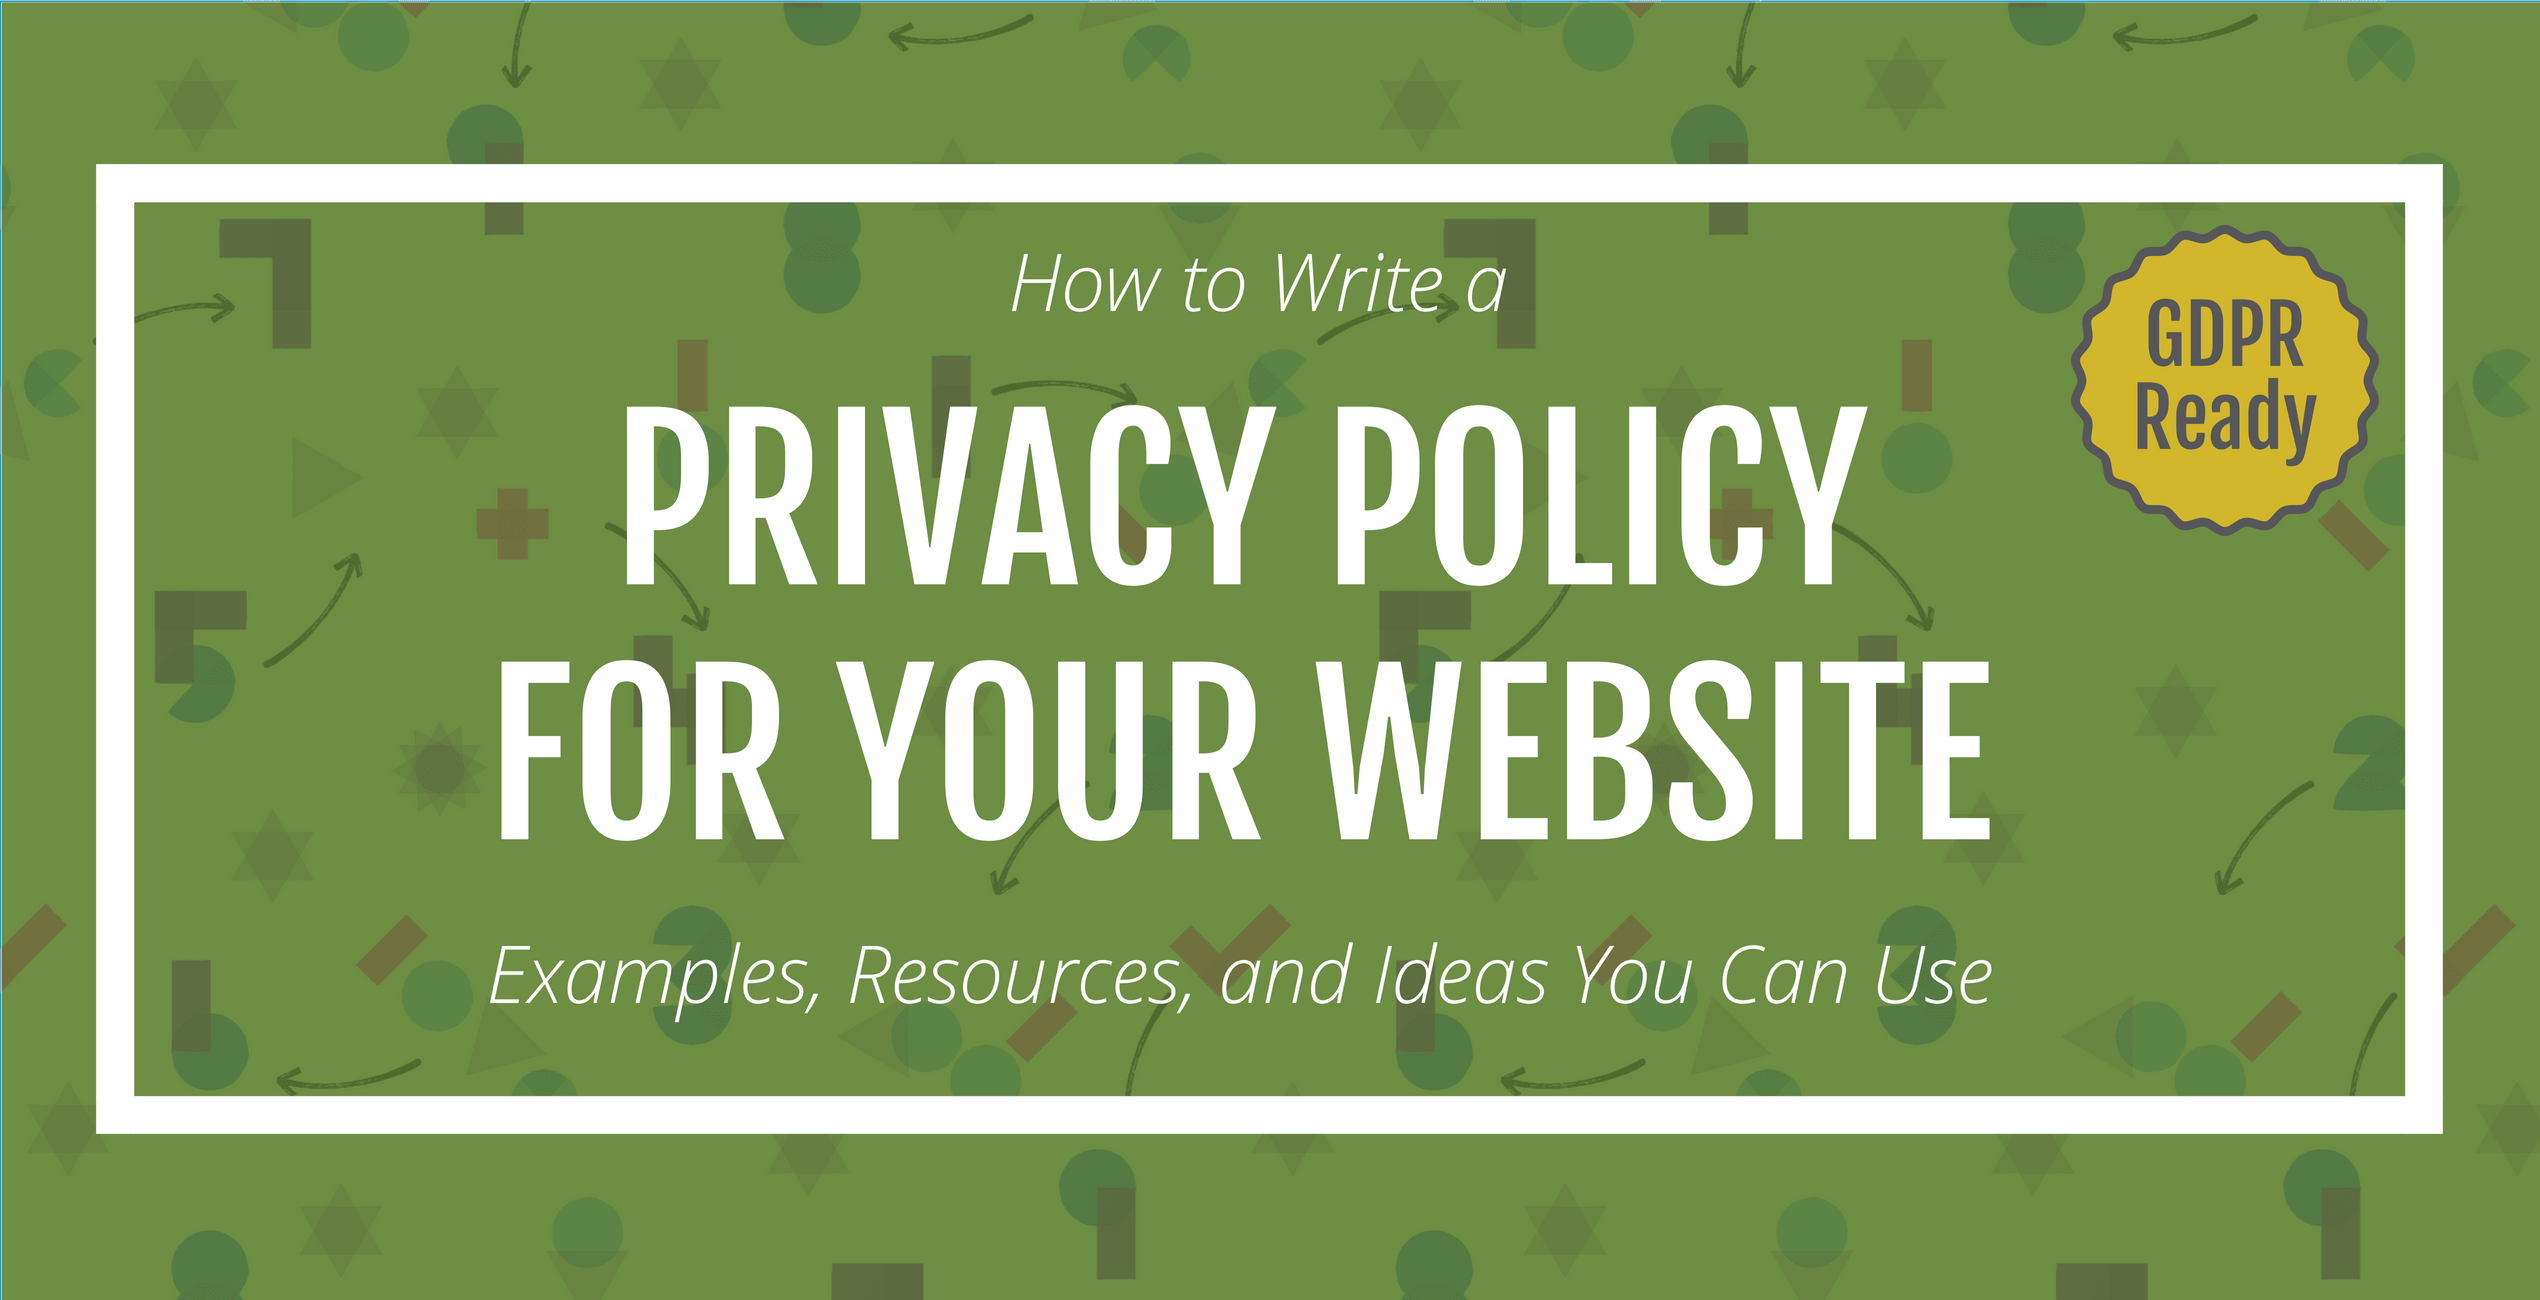 How to Write a Privacy Policy for Your Website: Examples, Resources, and Ideas You Can Use